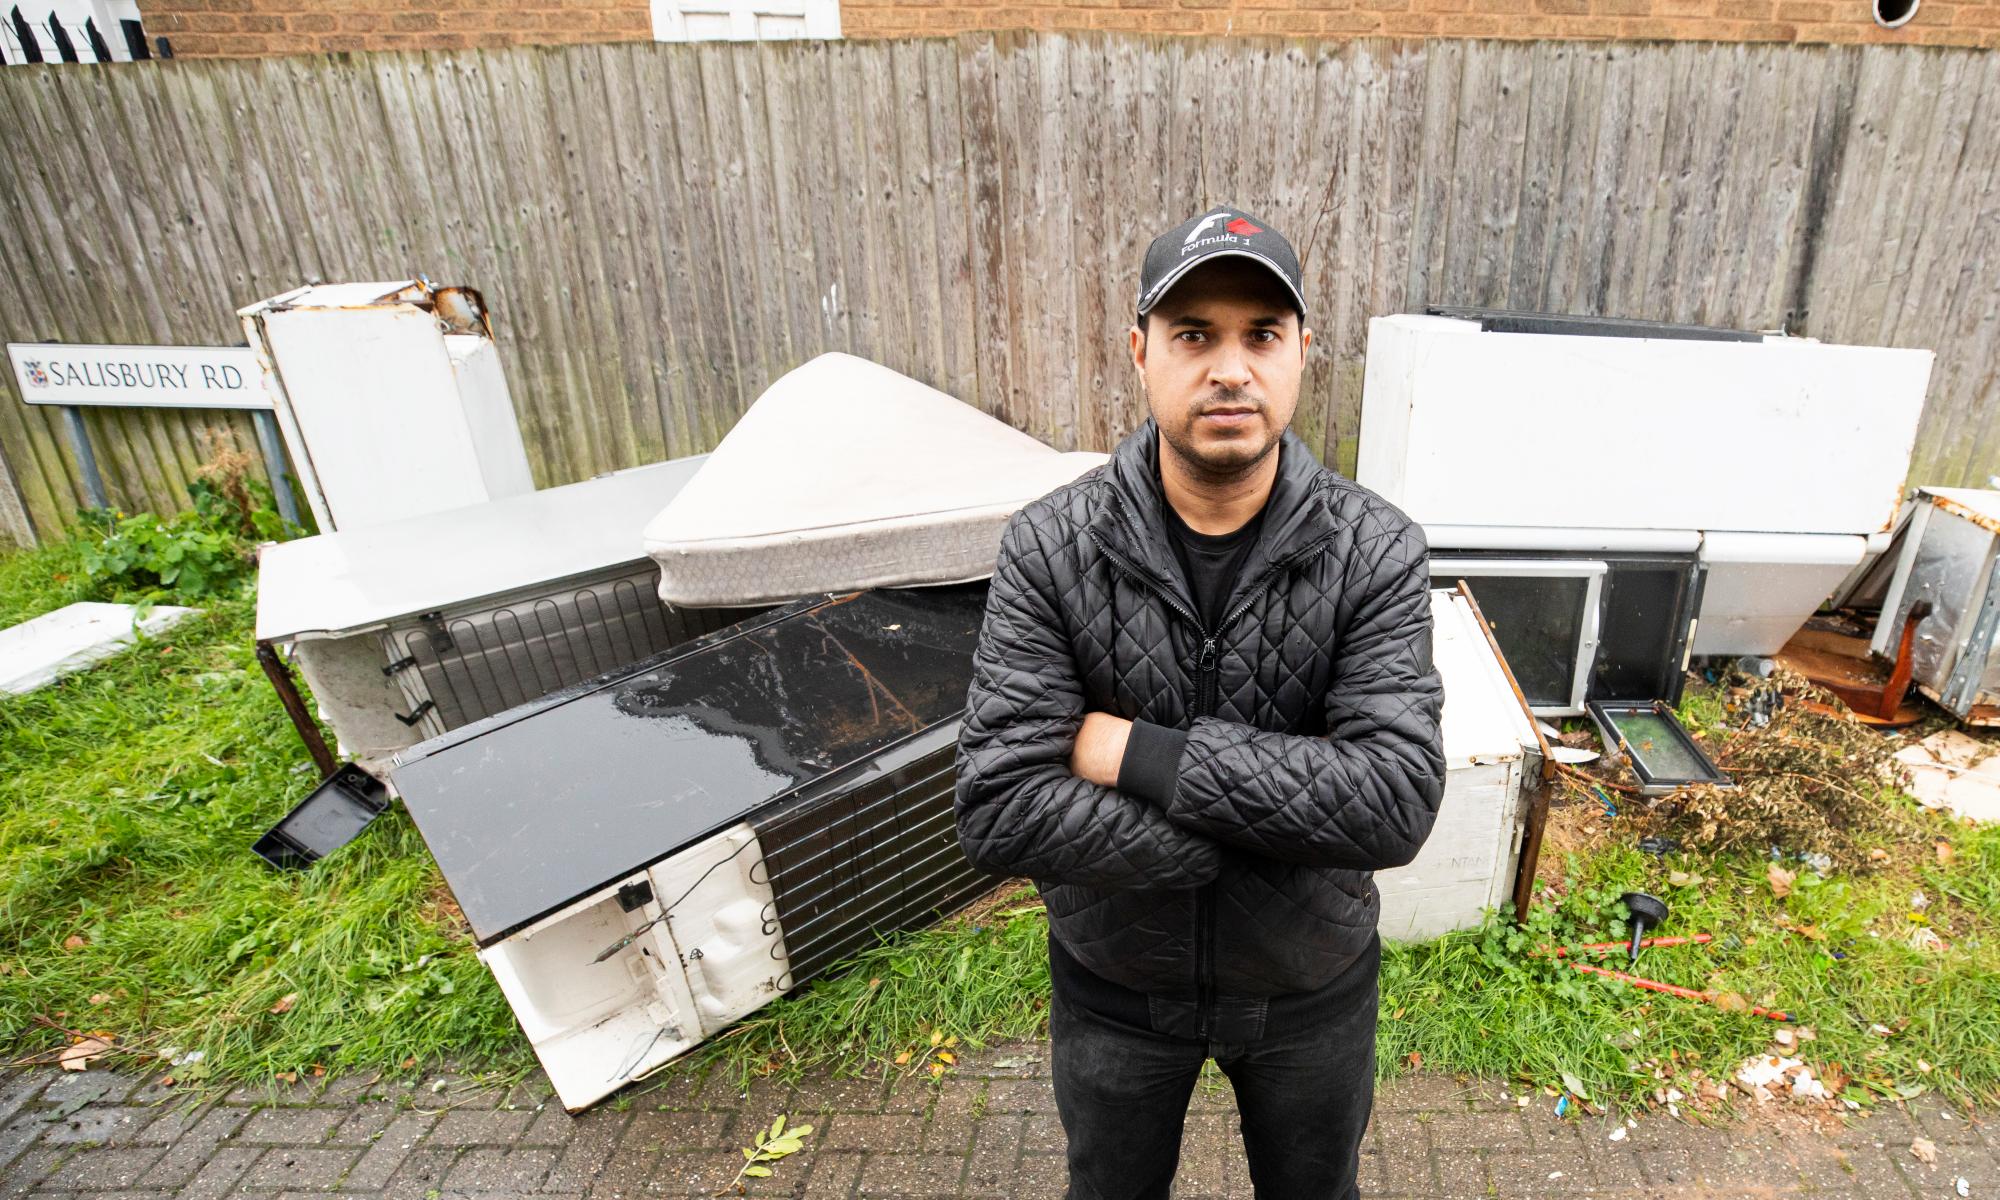 ‘One guy pulled a crowbar on me’: why fly-tipping wars are raging across Britain